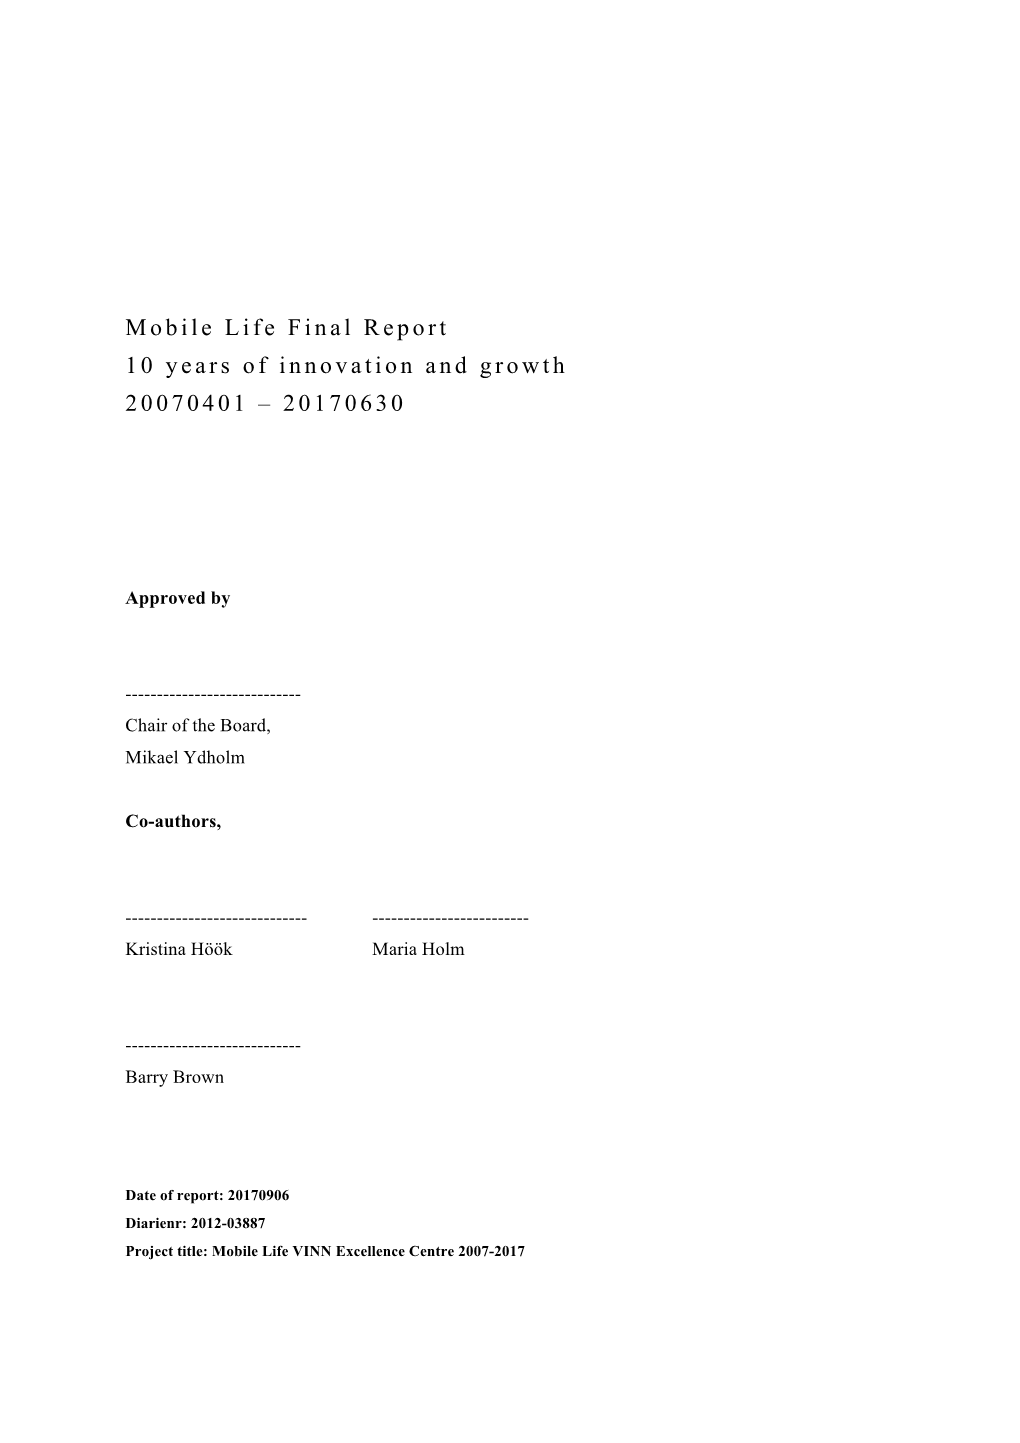 Mobile Life Final Report 10 Years of Innovation and Growth 20070401